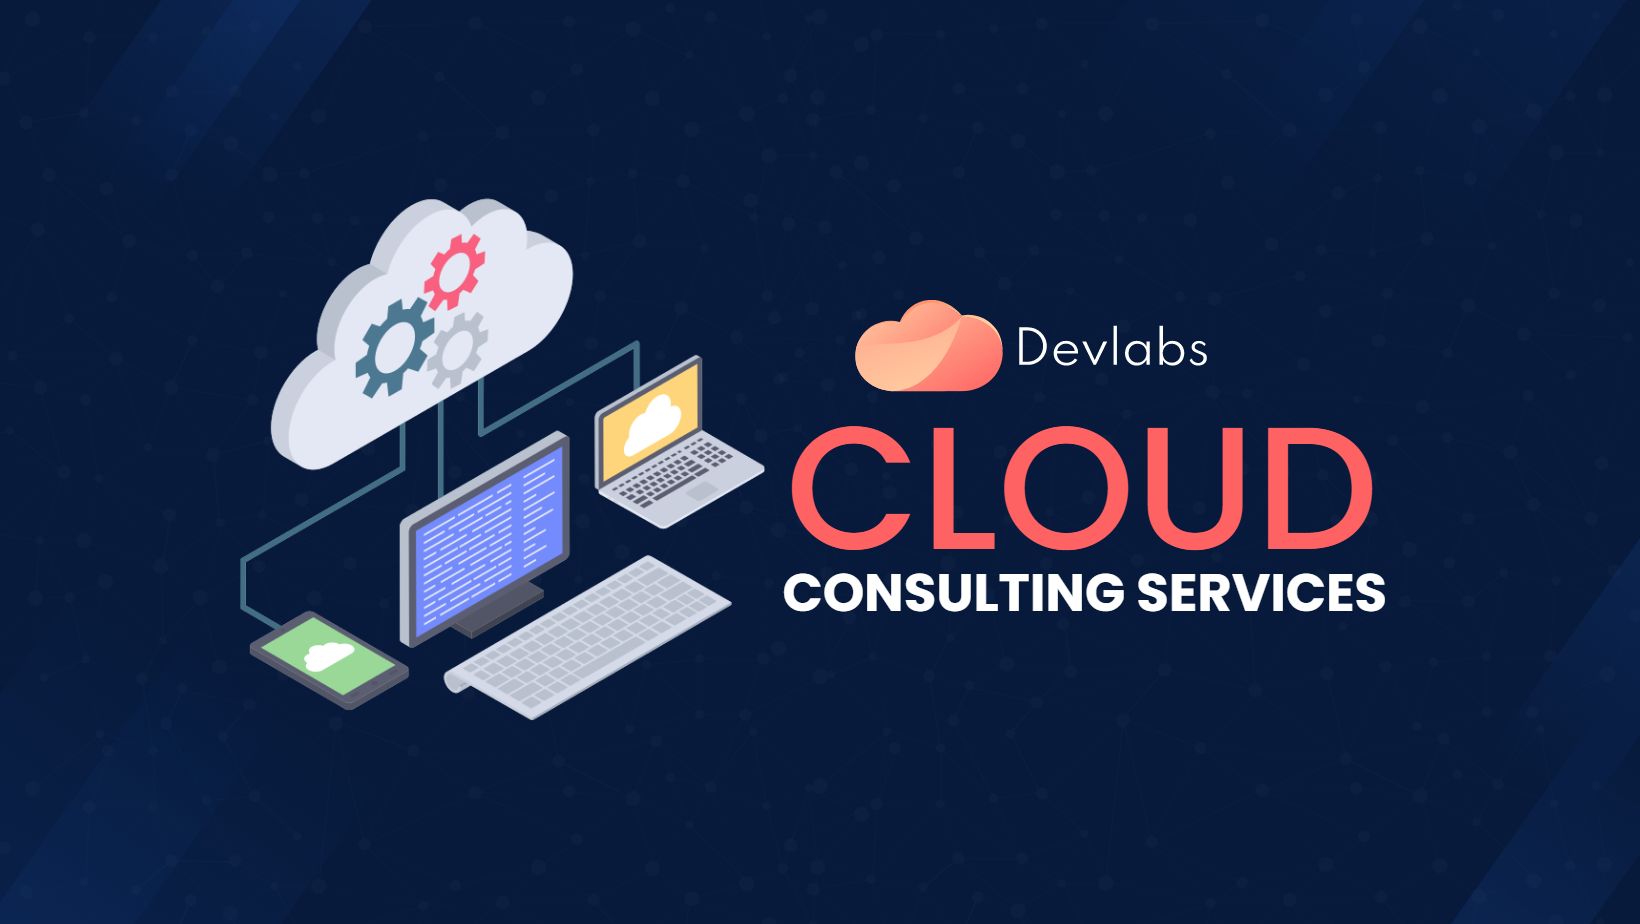 Cloud Consulting Services - Devlabs